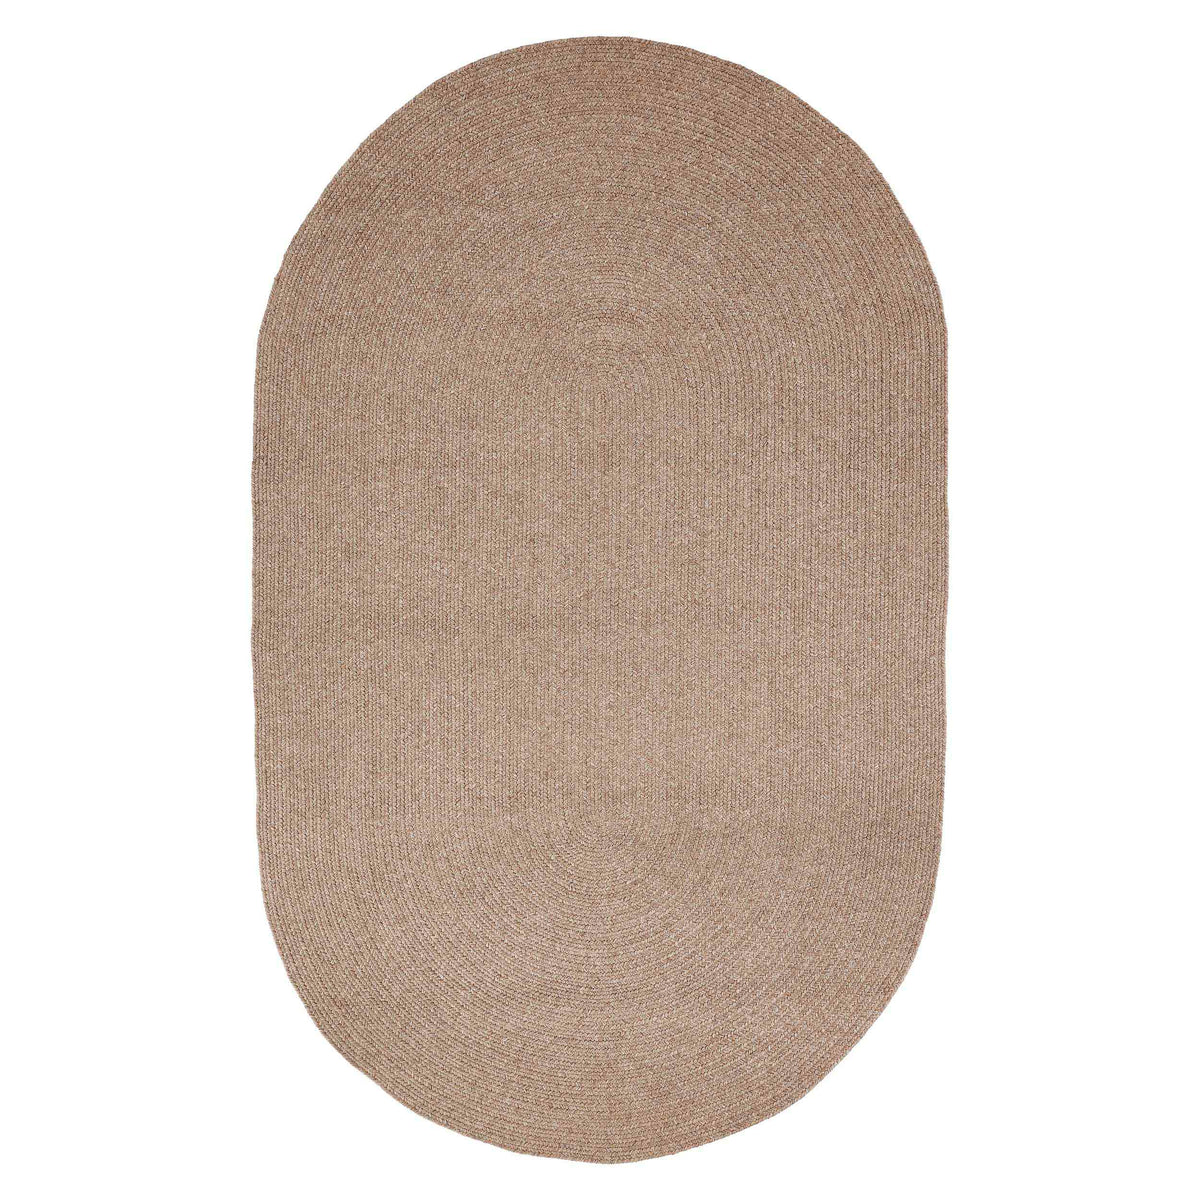 Classic Braided Weave Oval Area Rug Indoor Outdoor Rugs - Latte